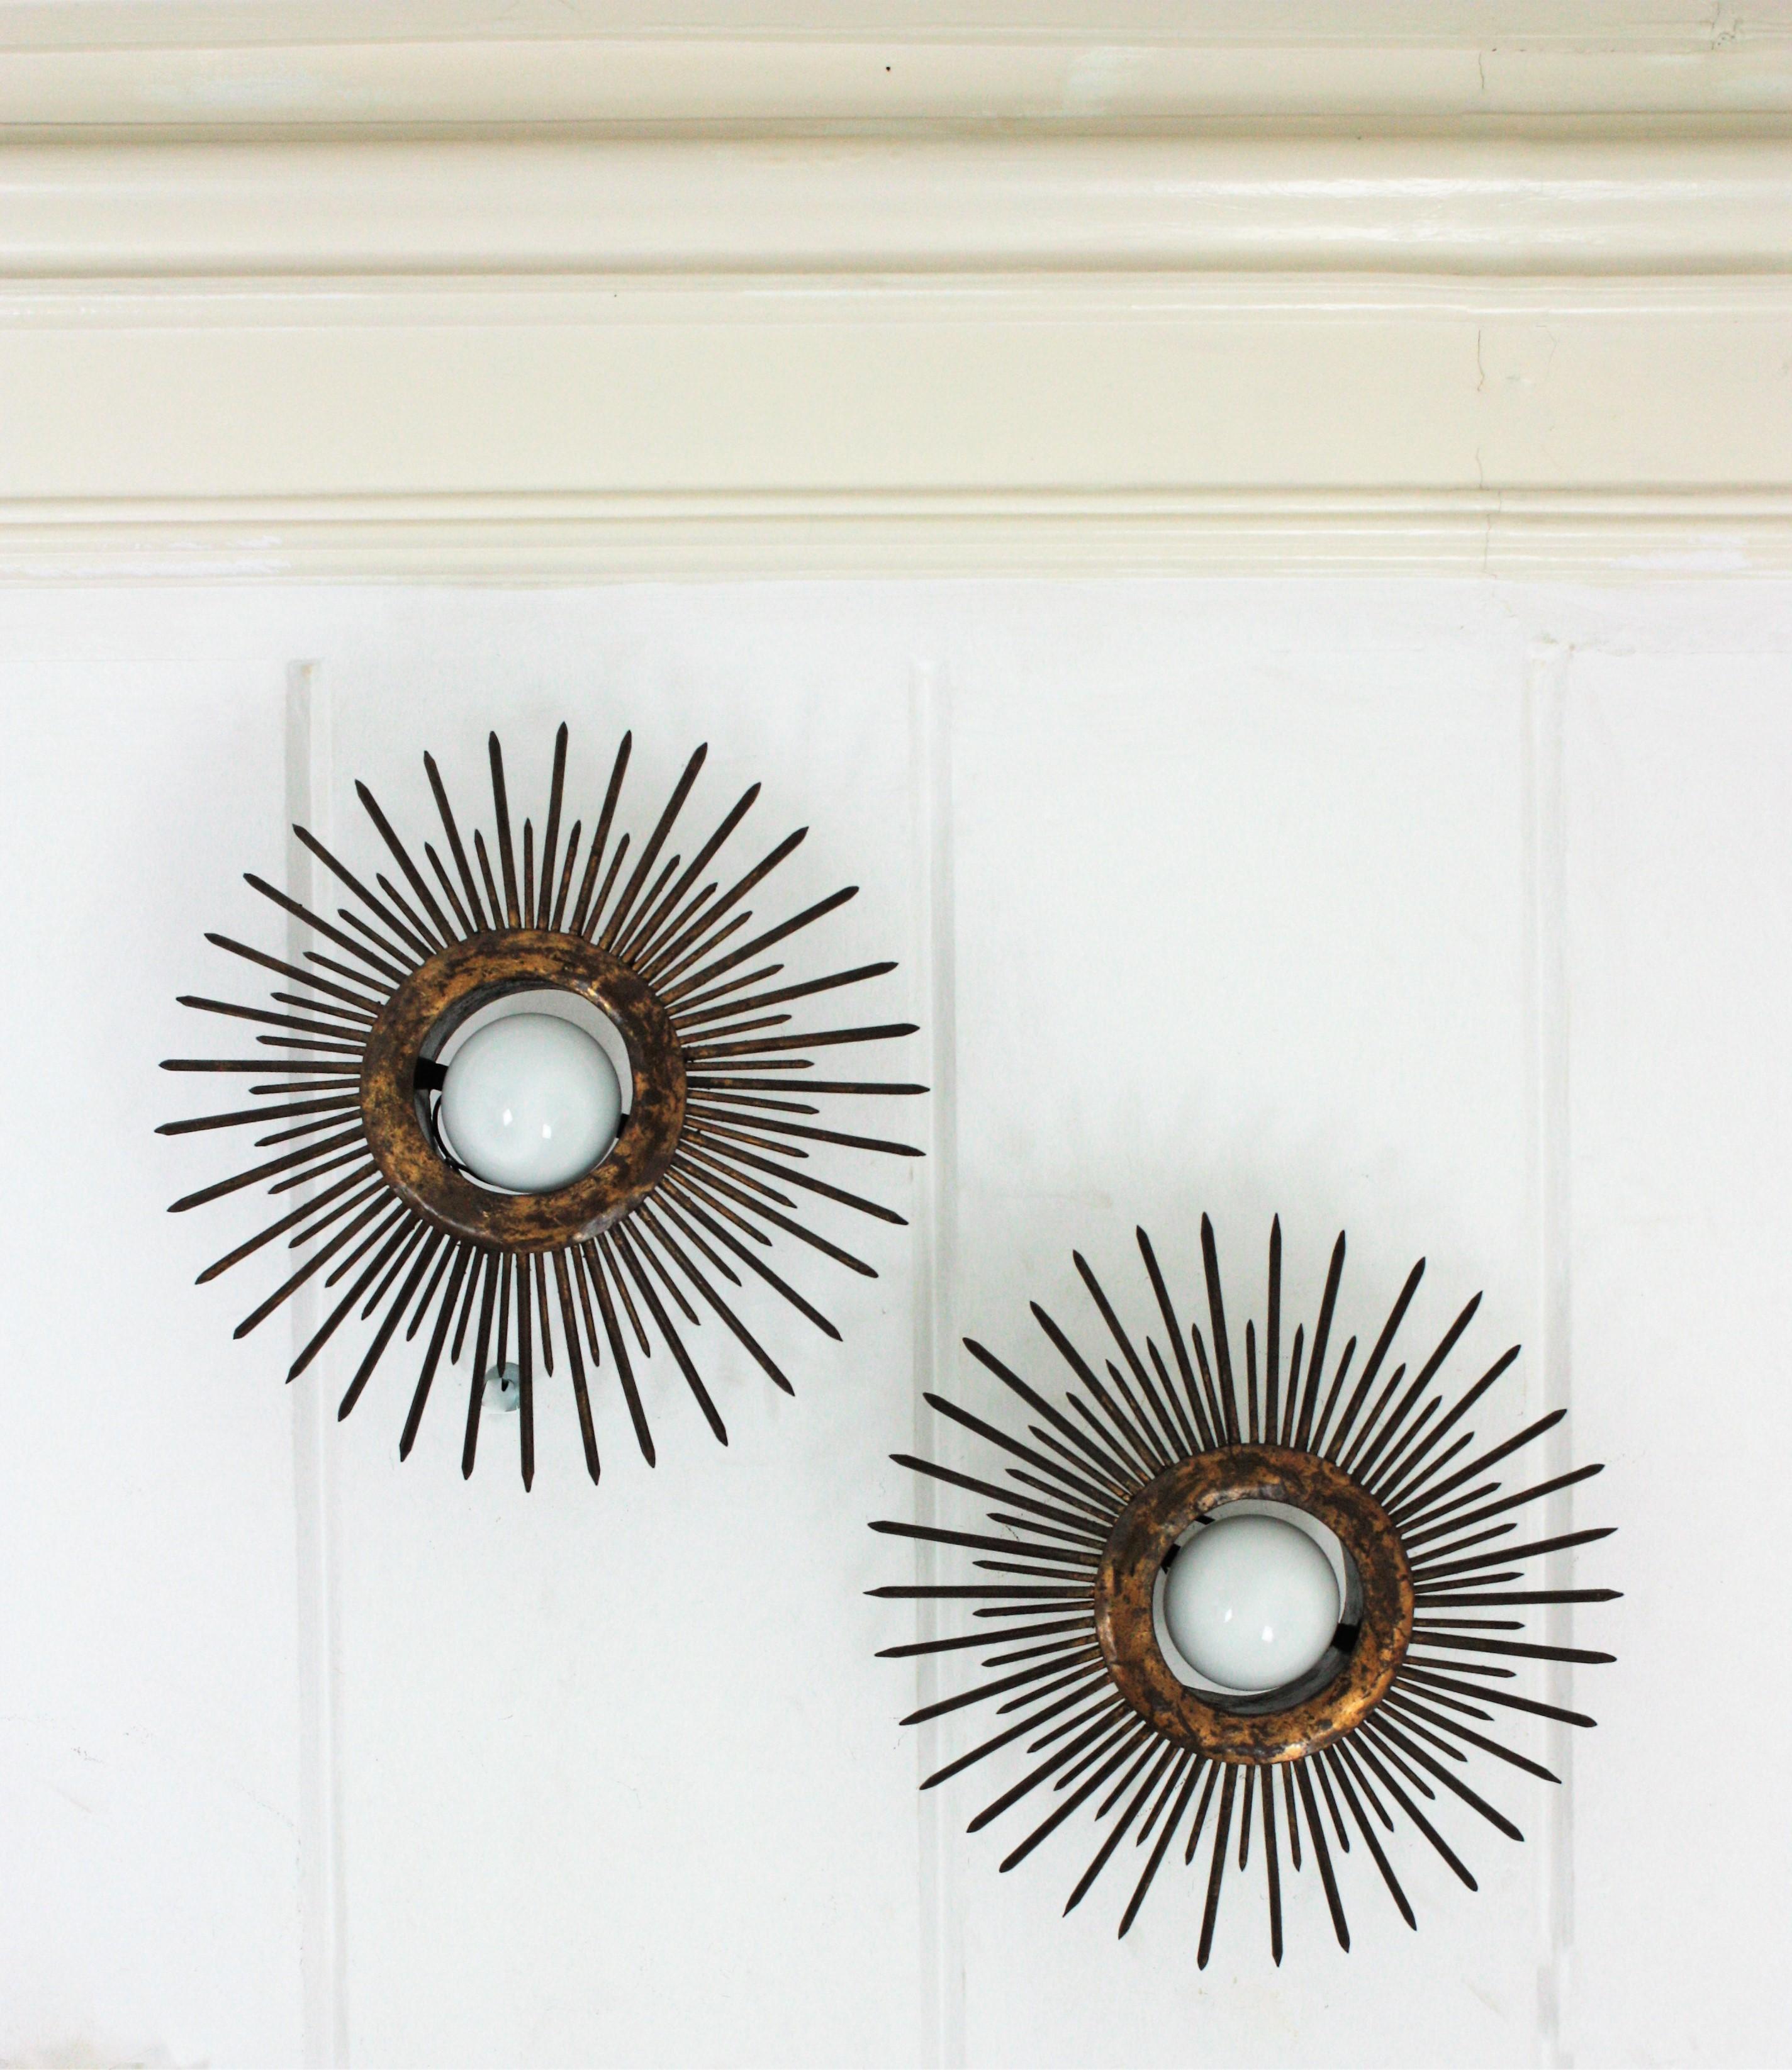 Wrought Iron Pair of Gilt Iron Sunburst Brutalist Light Fixtures with Design of Nails For Sale